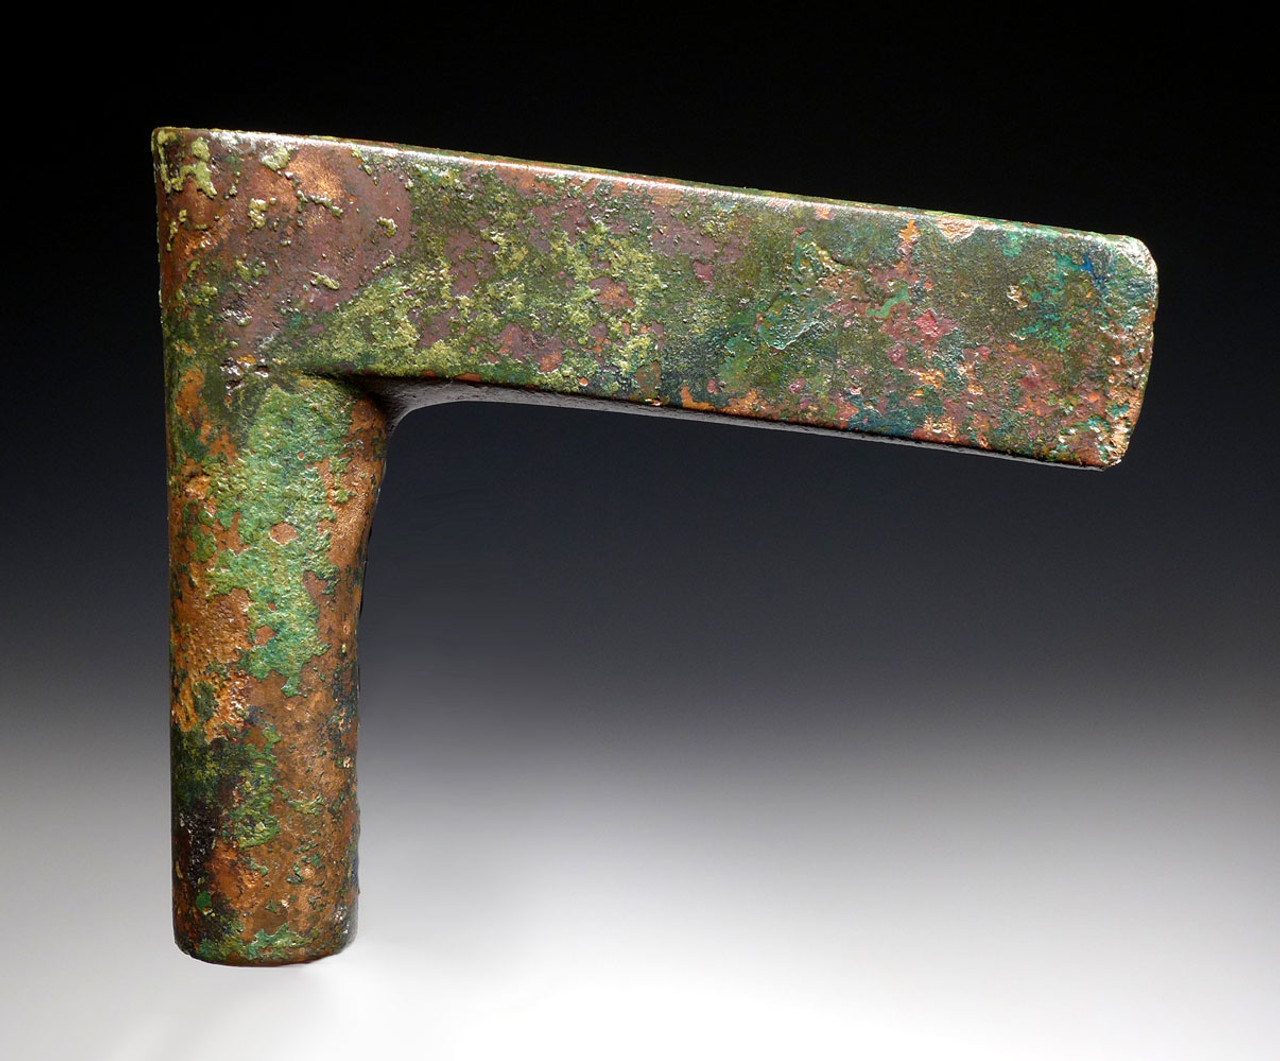 ARMOR-PIERCING LURISTAN BRONZE AXE FROM THE ANCIENT NEAR EAST  *LUR168